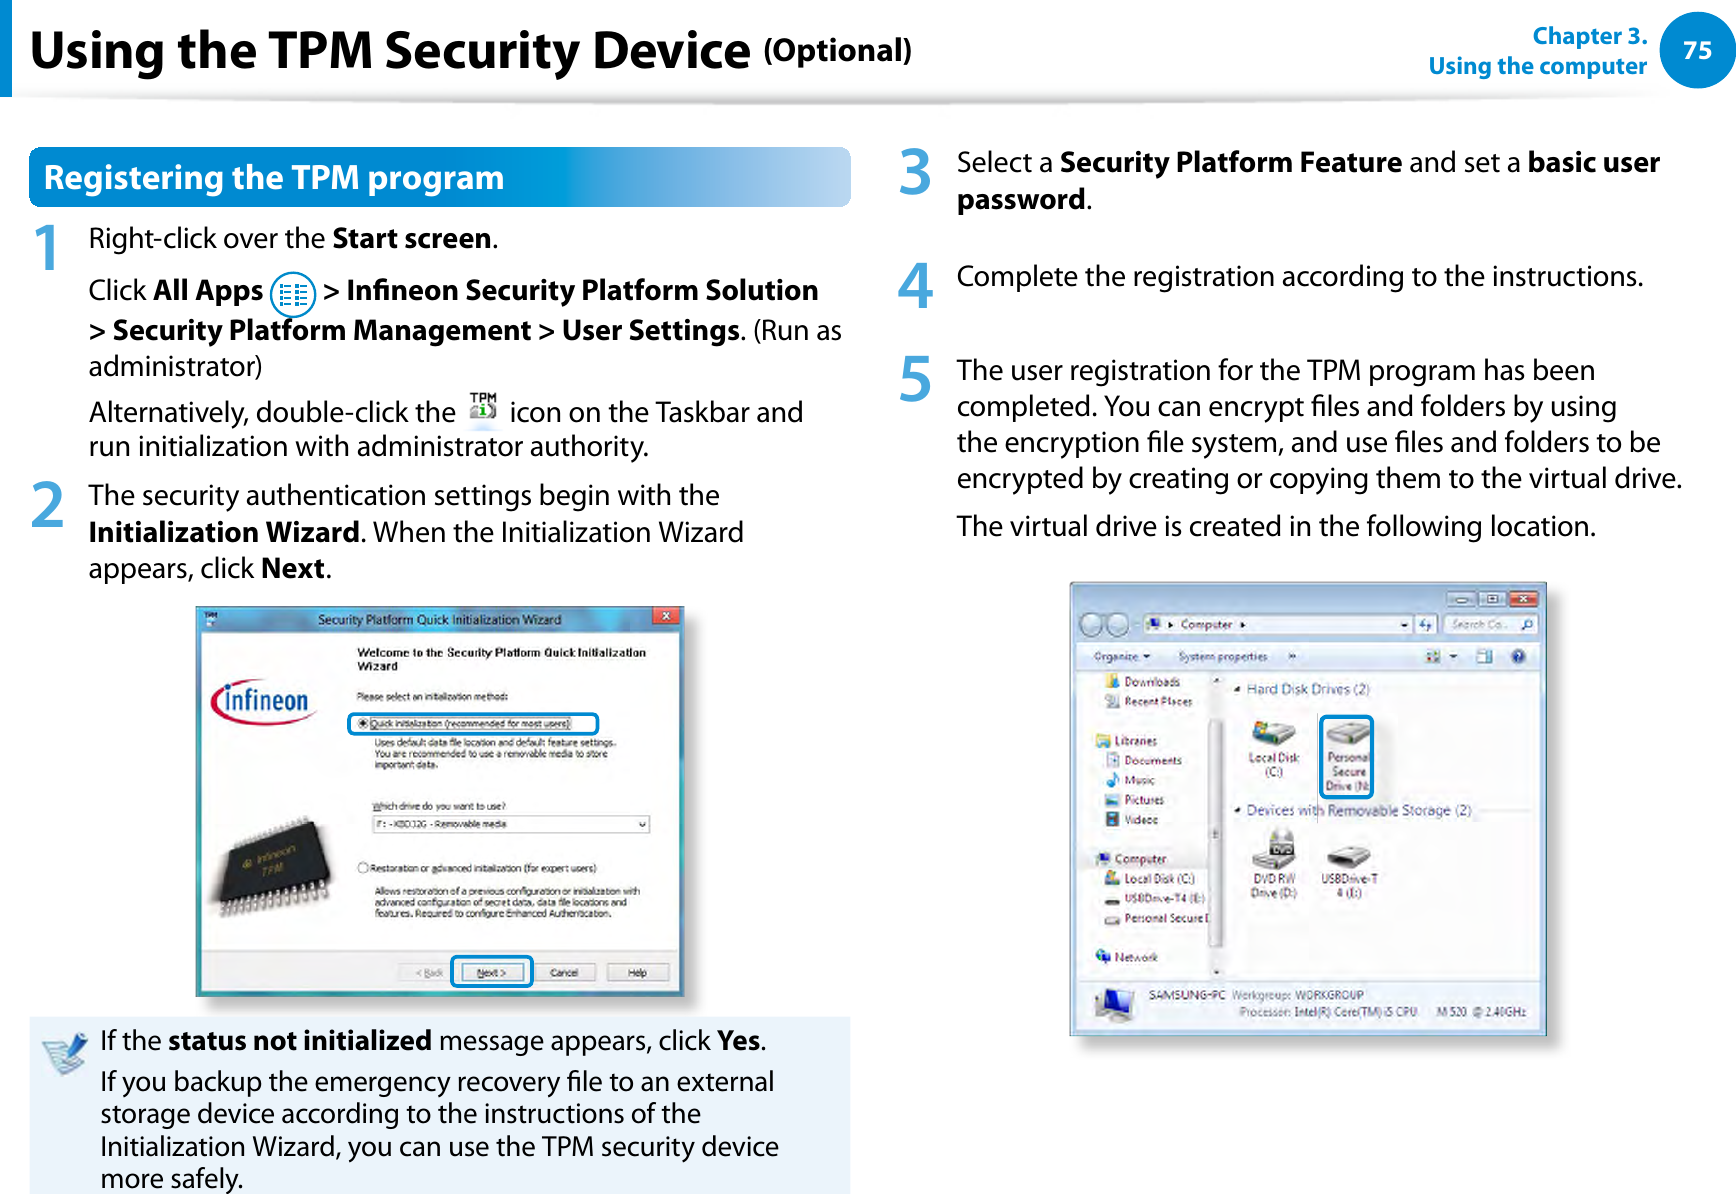 75Chapter 3.  Using the computerUsing the TPM Security Device (Optional)Registering the TPM program1  Right-click over the Start screen.Click All Apps   &gt; Inneon Security Platform Solution &gt; Security Platform Management &gt; User Settings. (Run as administrator)Alternatively, double-click the   icon on the Taskbar and run initialization with administrator authority.2  The security authentication settings begin with the Initialization Wizard. When the Initialization Wizard appears, click Next. If the status not initialized message appears, click Yes.If you backup the emergency recovery le to an external storage device according to the instructions of the Initialization Wizard, you can use the TPM security device more safely.3 Select a Security Platform Feature and set a basic user password.4  Complete the registration according to the instructions.5  The user registration for the TPM program has been completed. You can encrypt les and folders by using the encryption le system, and use les and folders to be encrypted by creating or copying them to the virtual drive. The virtual drive is created in the following location. 